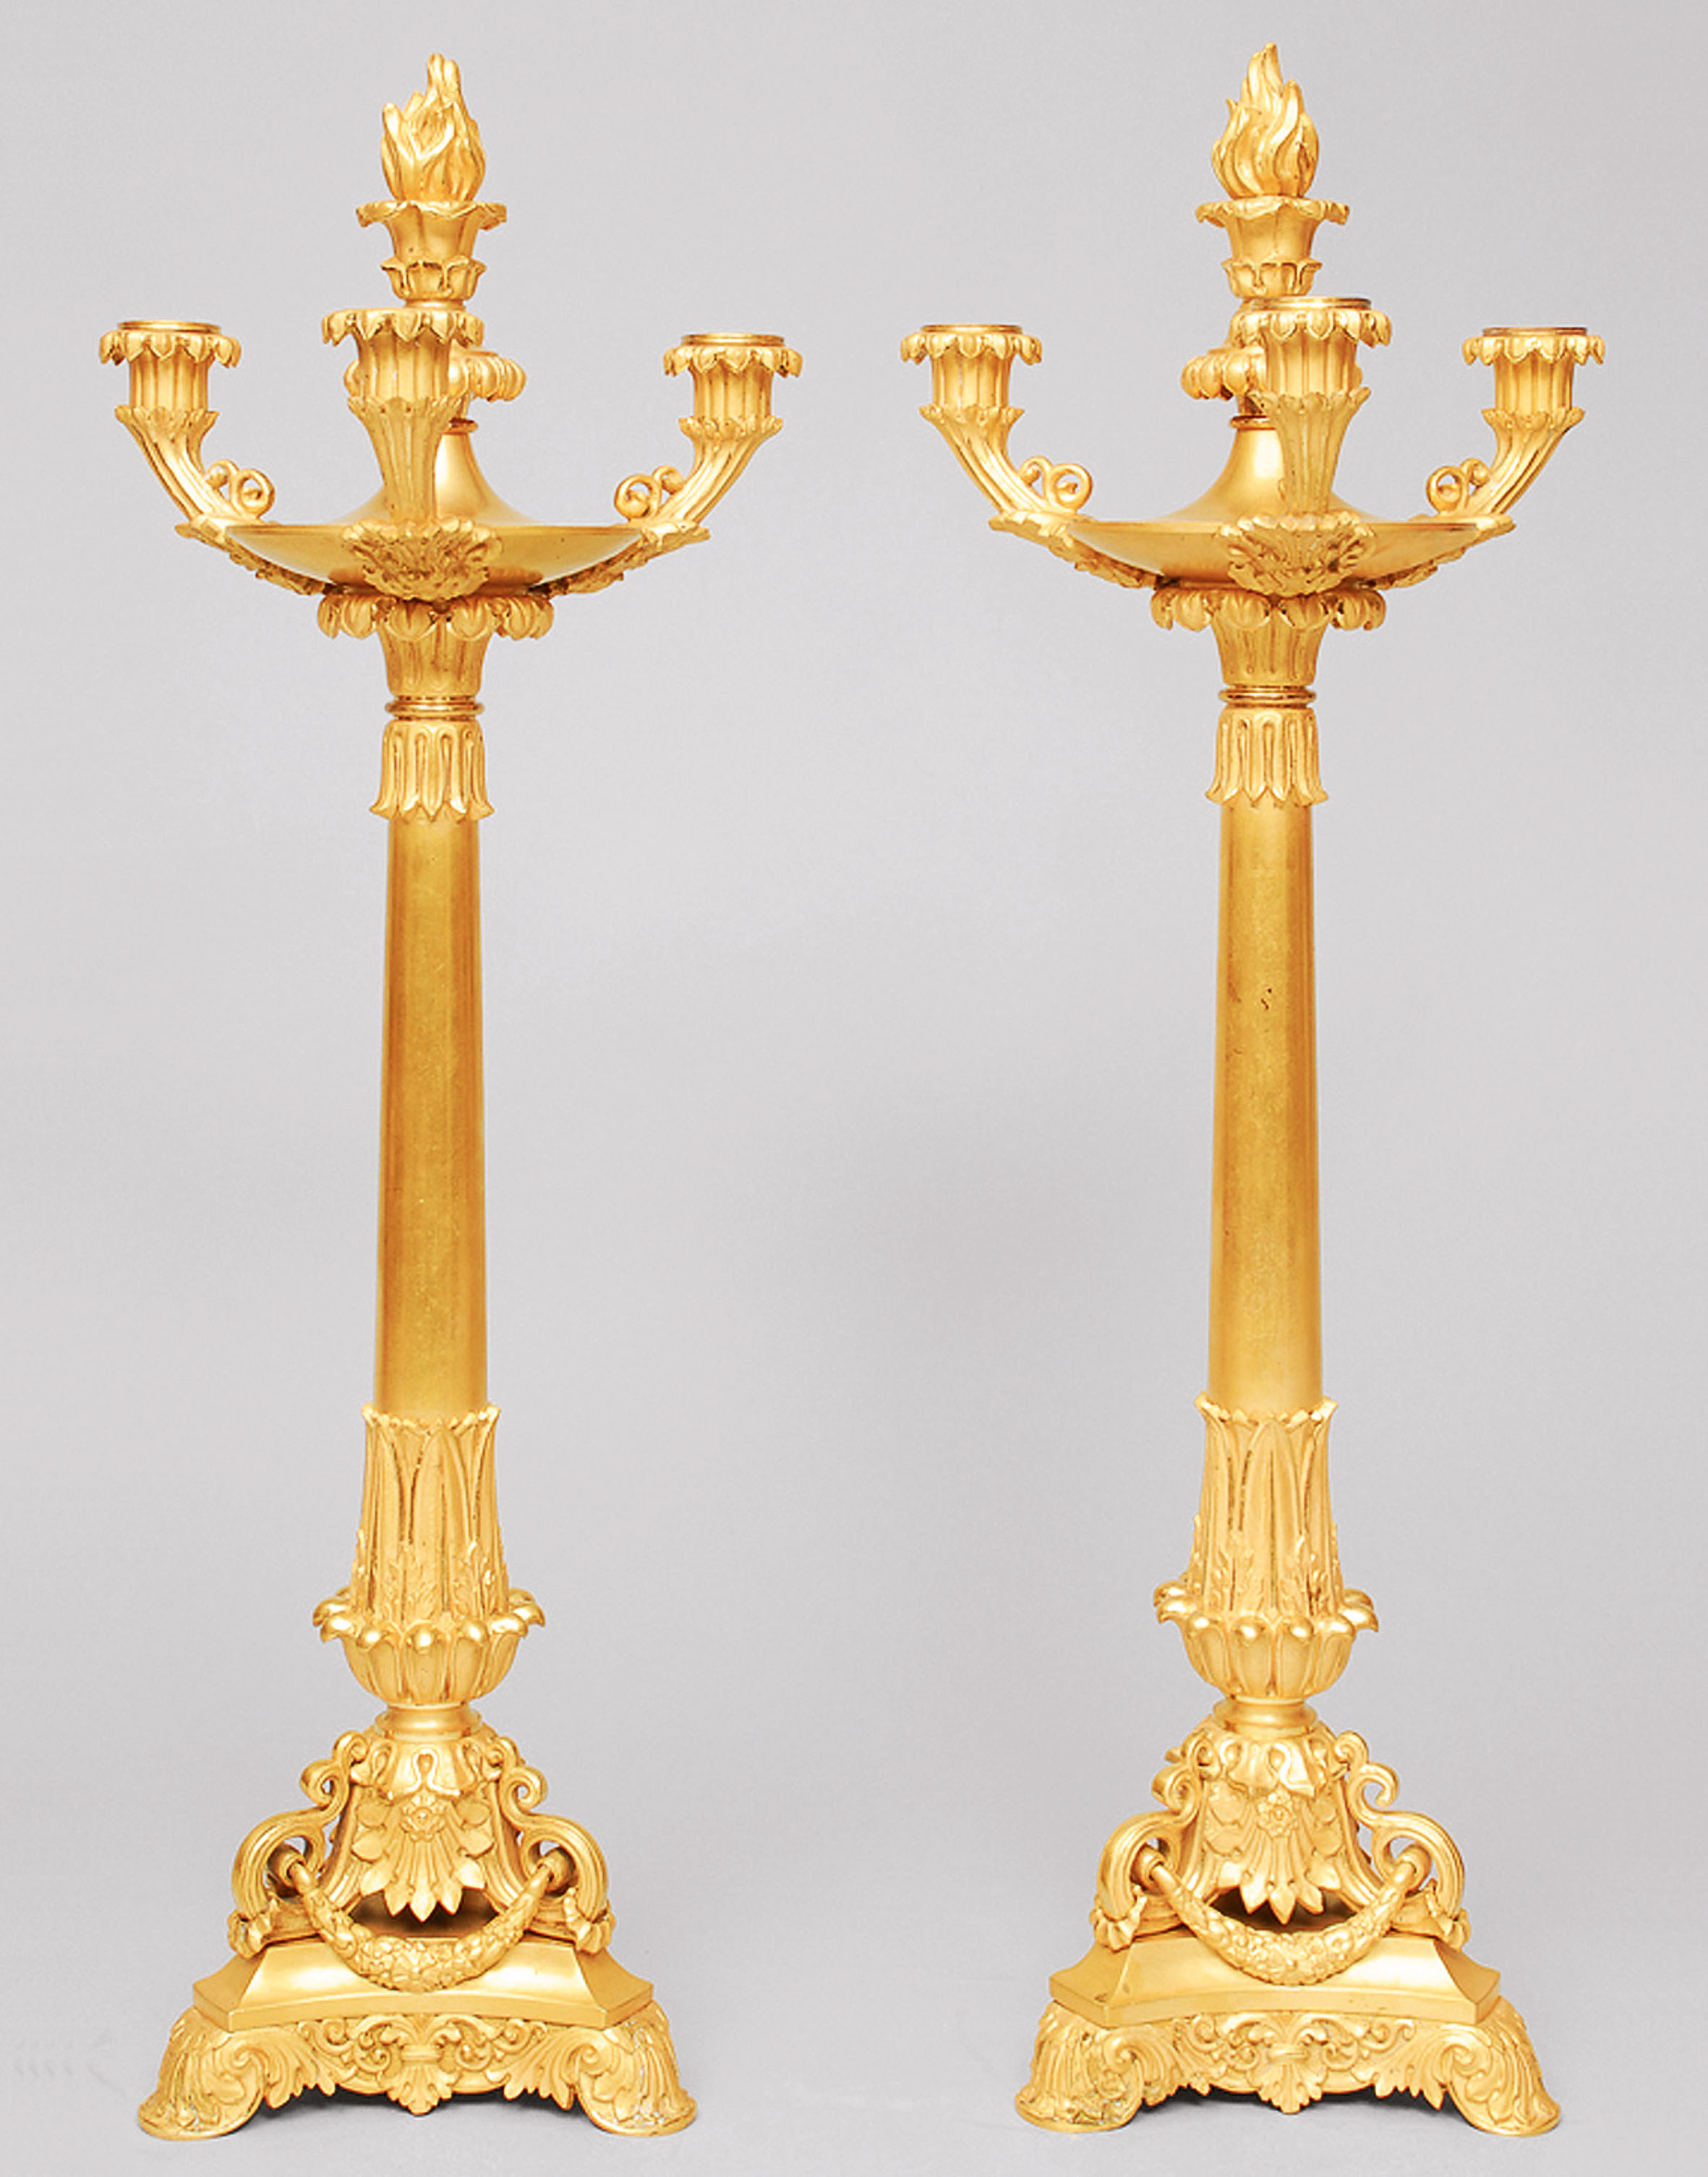 A pair of french Empire candle holders